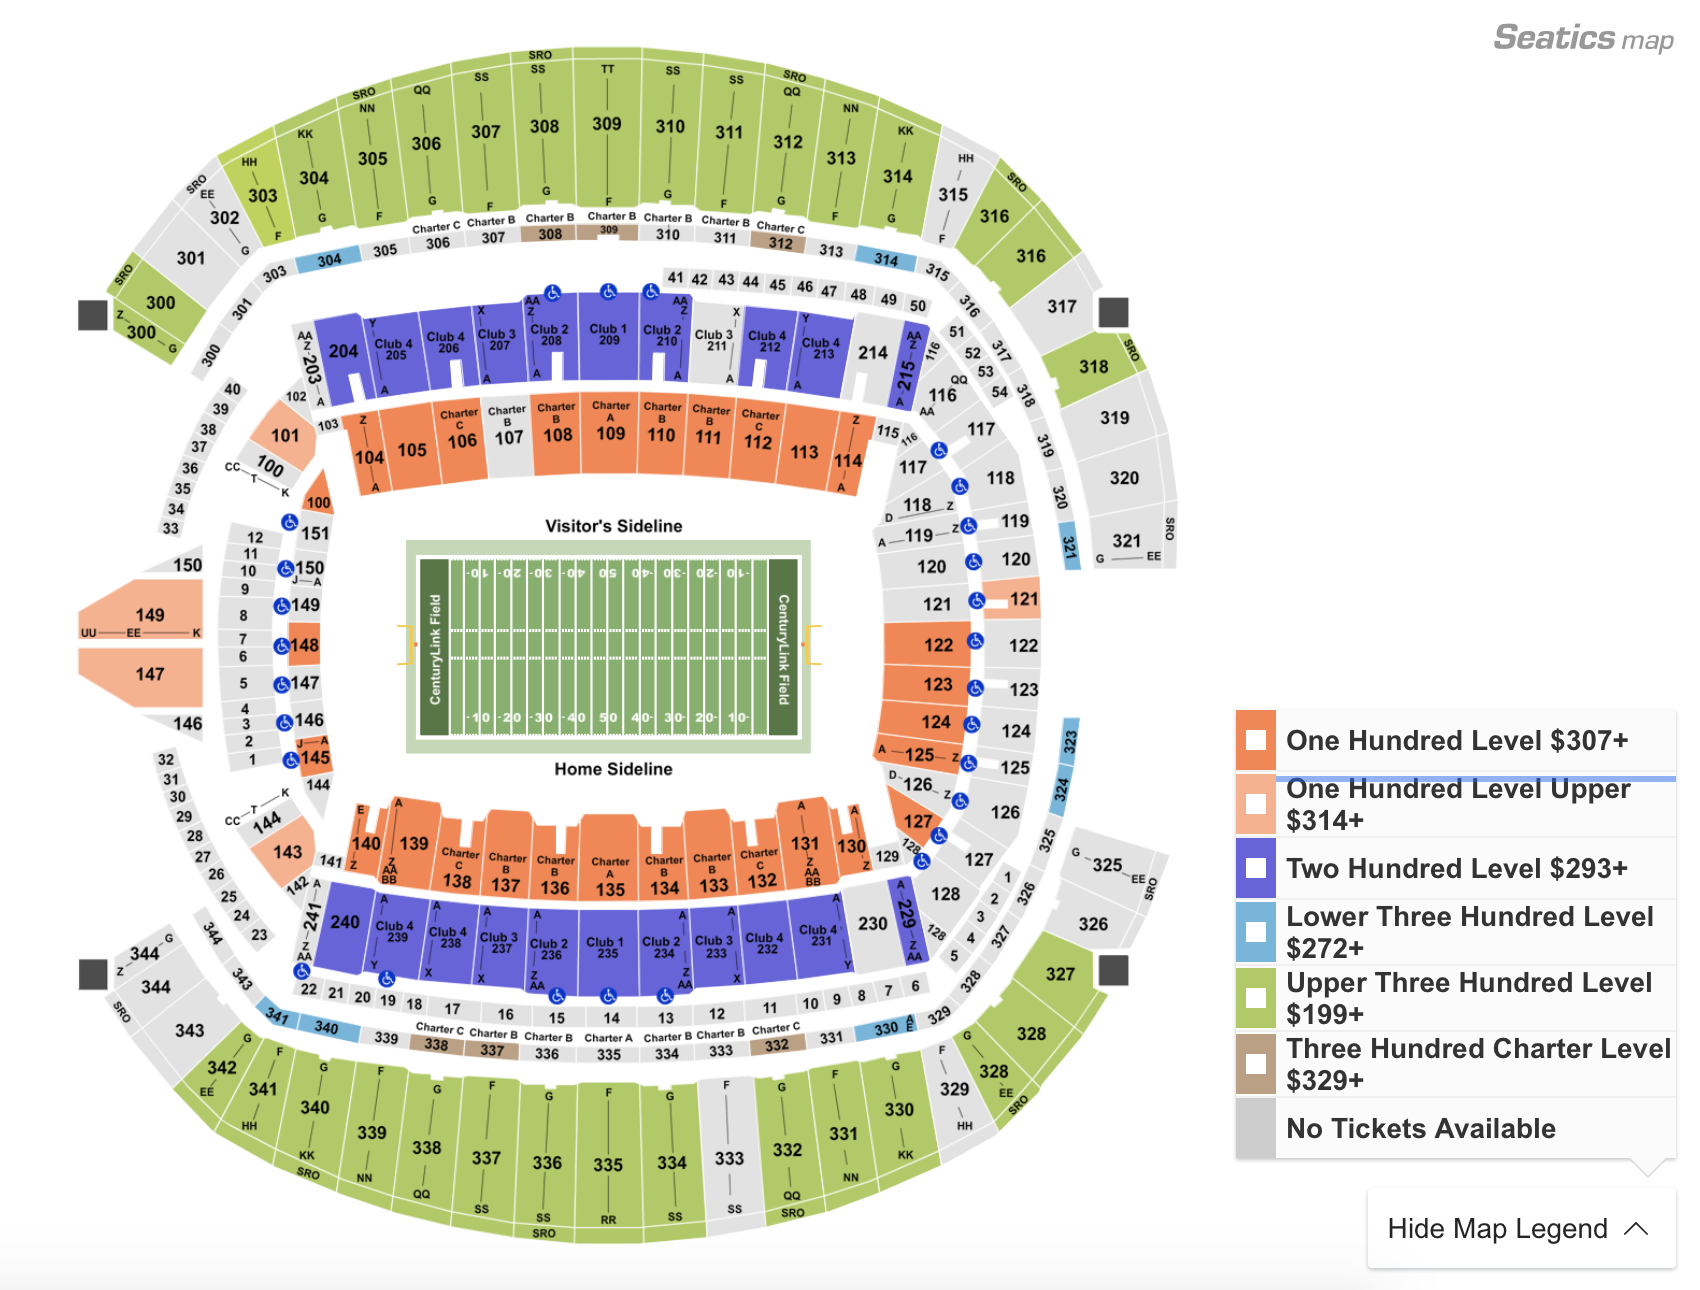 Where To Find The Cheapest Seahawks Vs Saints Tickets At Centurylink Field 9 22 19